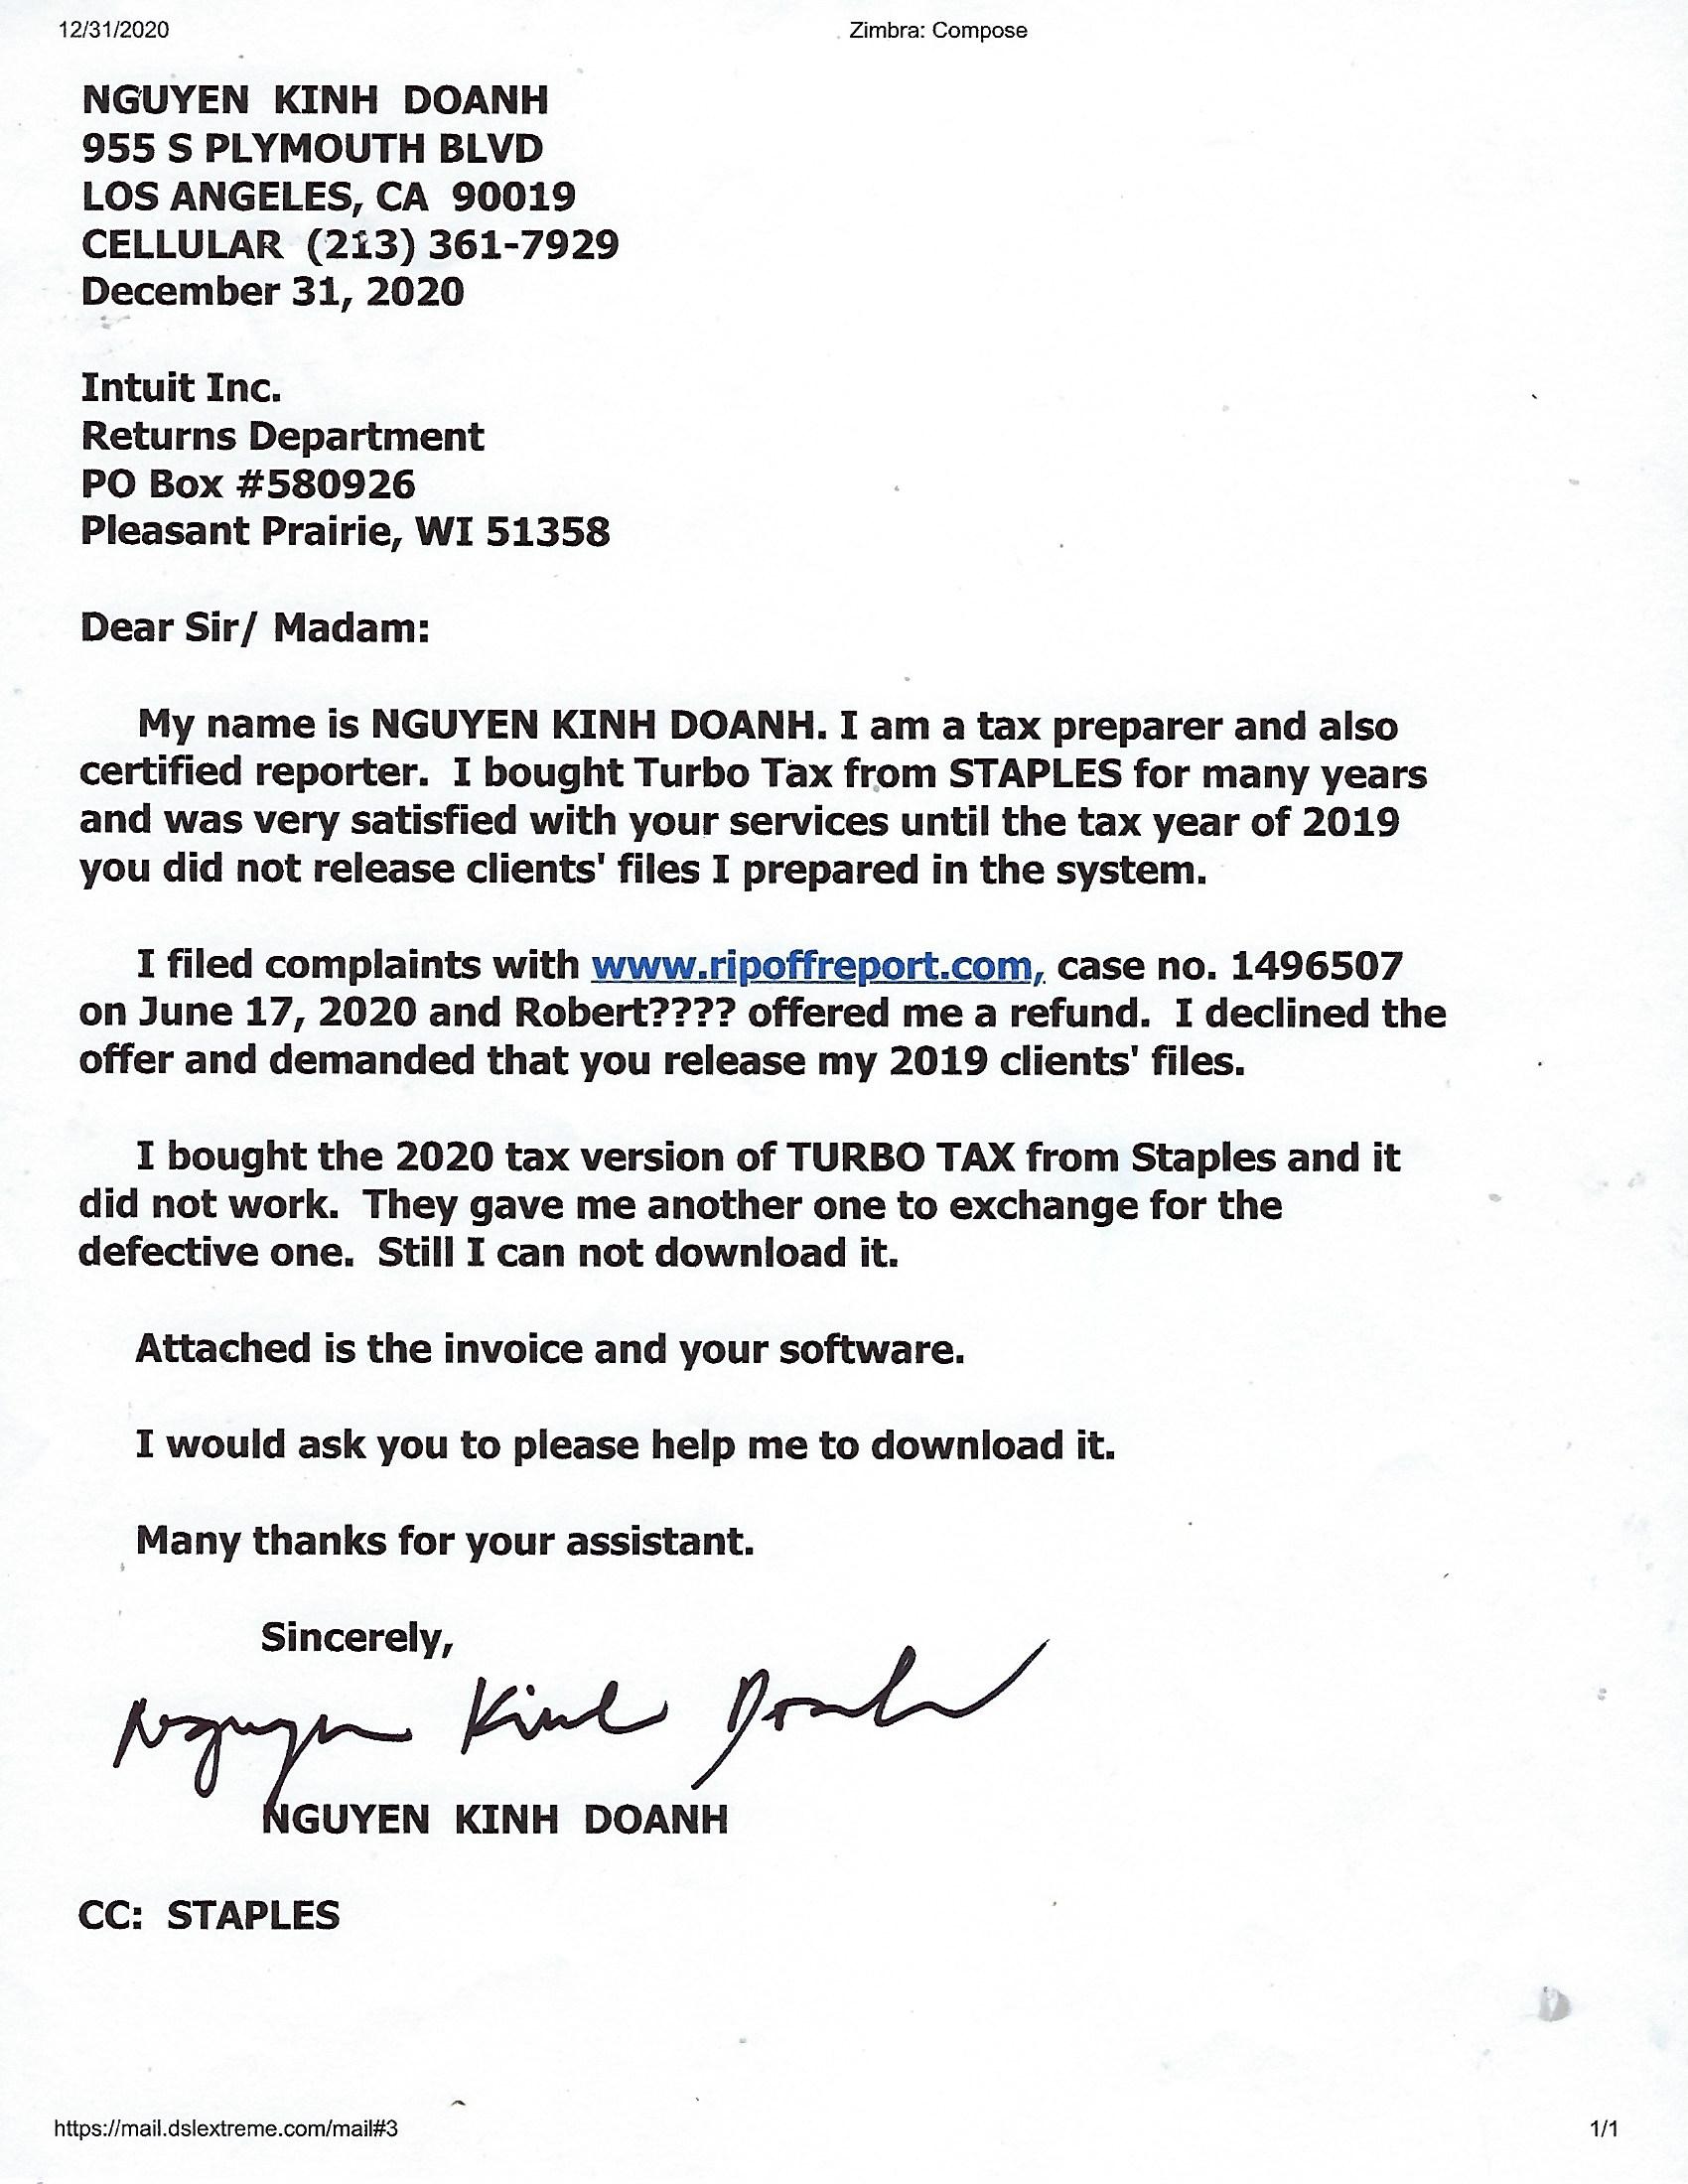 LETTER DATED DECEMBER 31, 2020 TO INTUIT